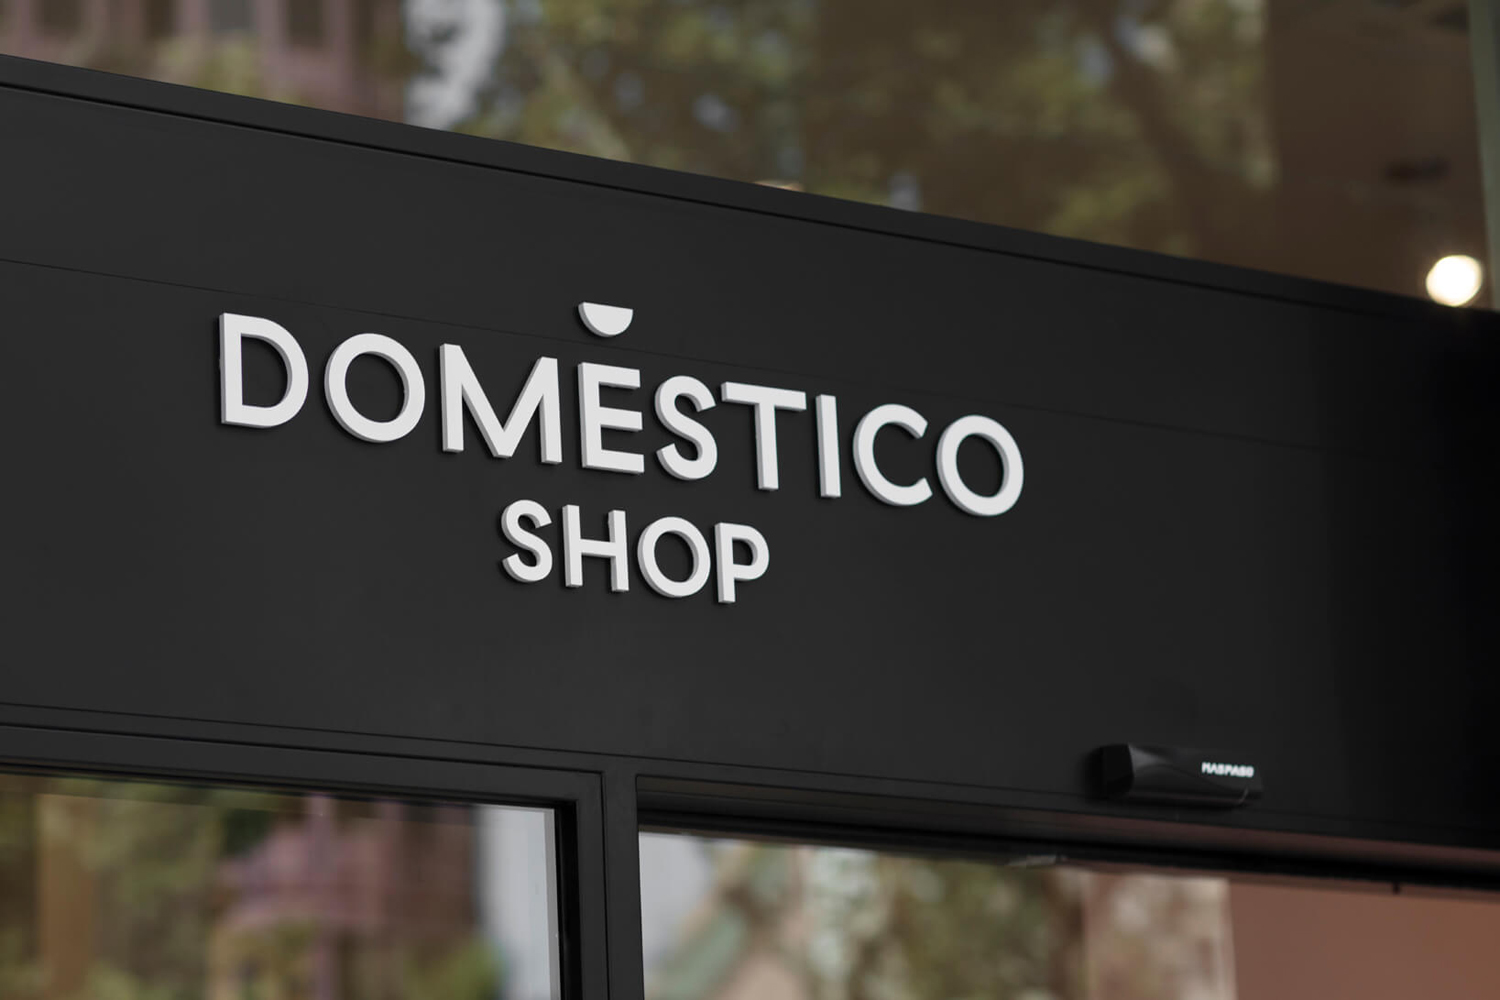 Logotype and signage designed by Mucho for Spanish furniture retailer DomésticoShop